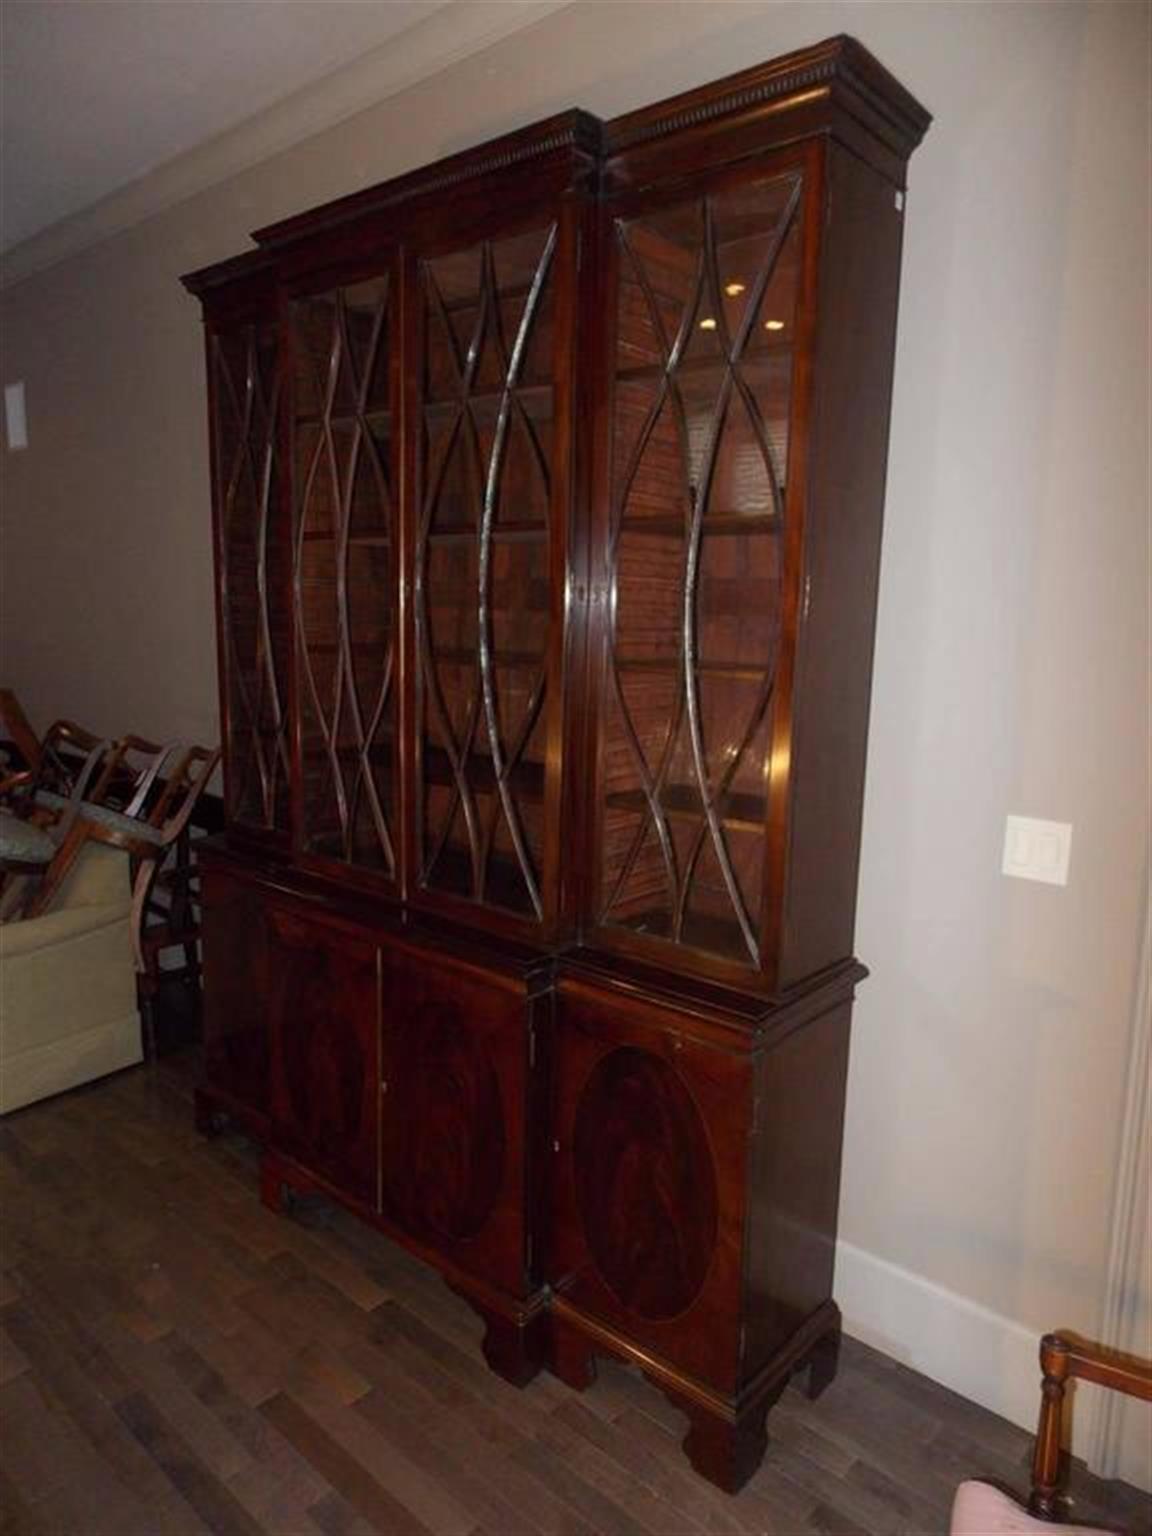 English mahogany breakfront with carved dental molding cornice, four upper case glass doors with arched serpentine mullions, adjustable interior shelving, flanking lower case oval inlaid cabinets concealing interior shelving and resting on a raised